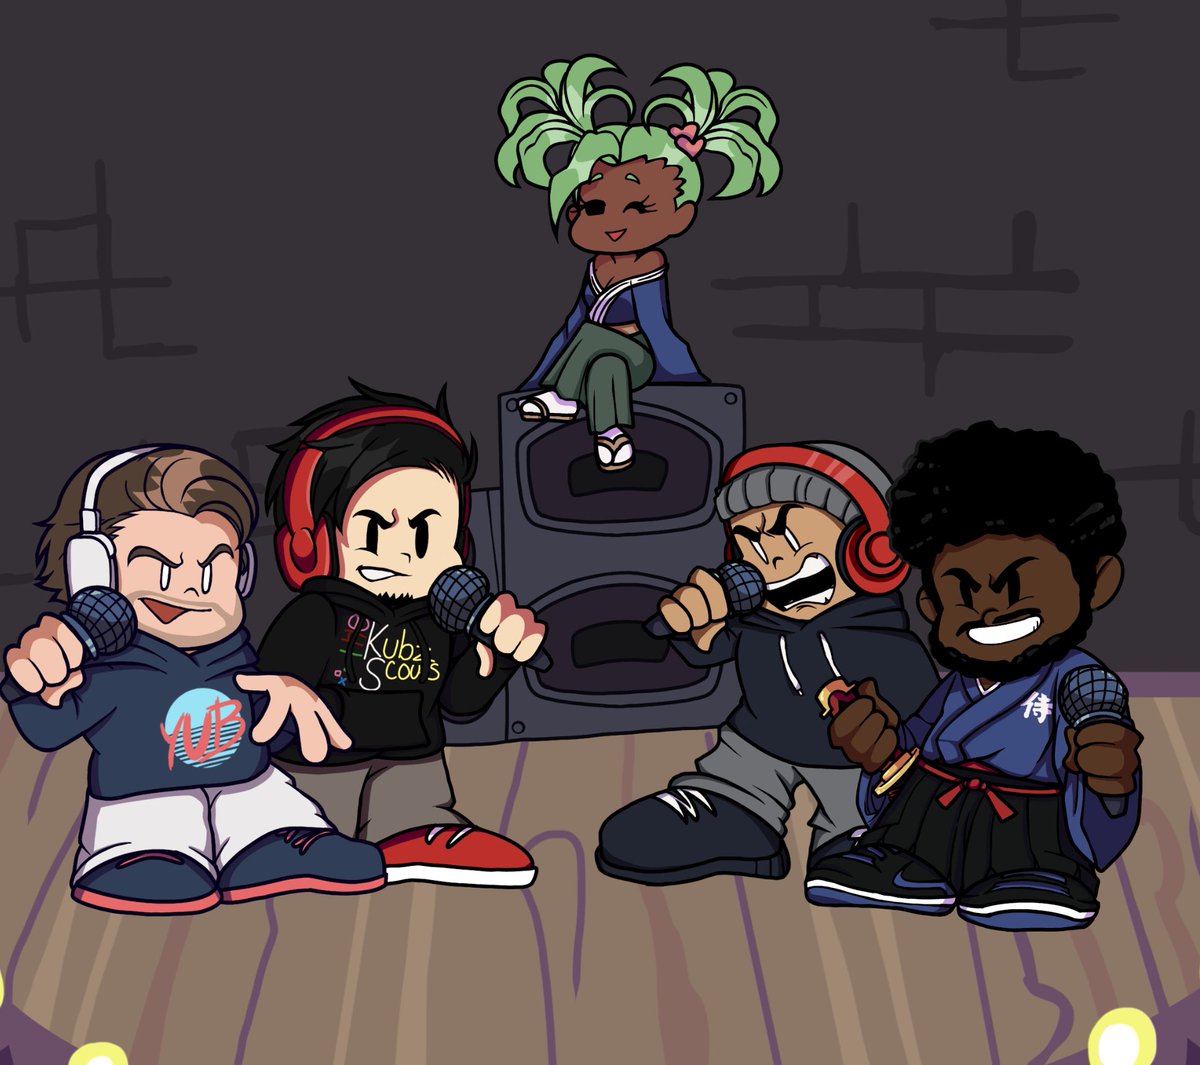 Many people requested @YuBPlays and everyone’s favorite shogun @CoryxKenshi...